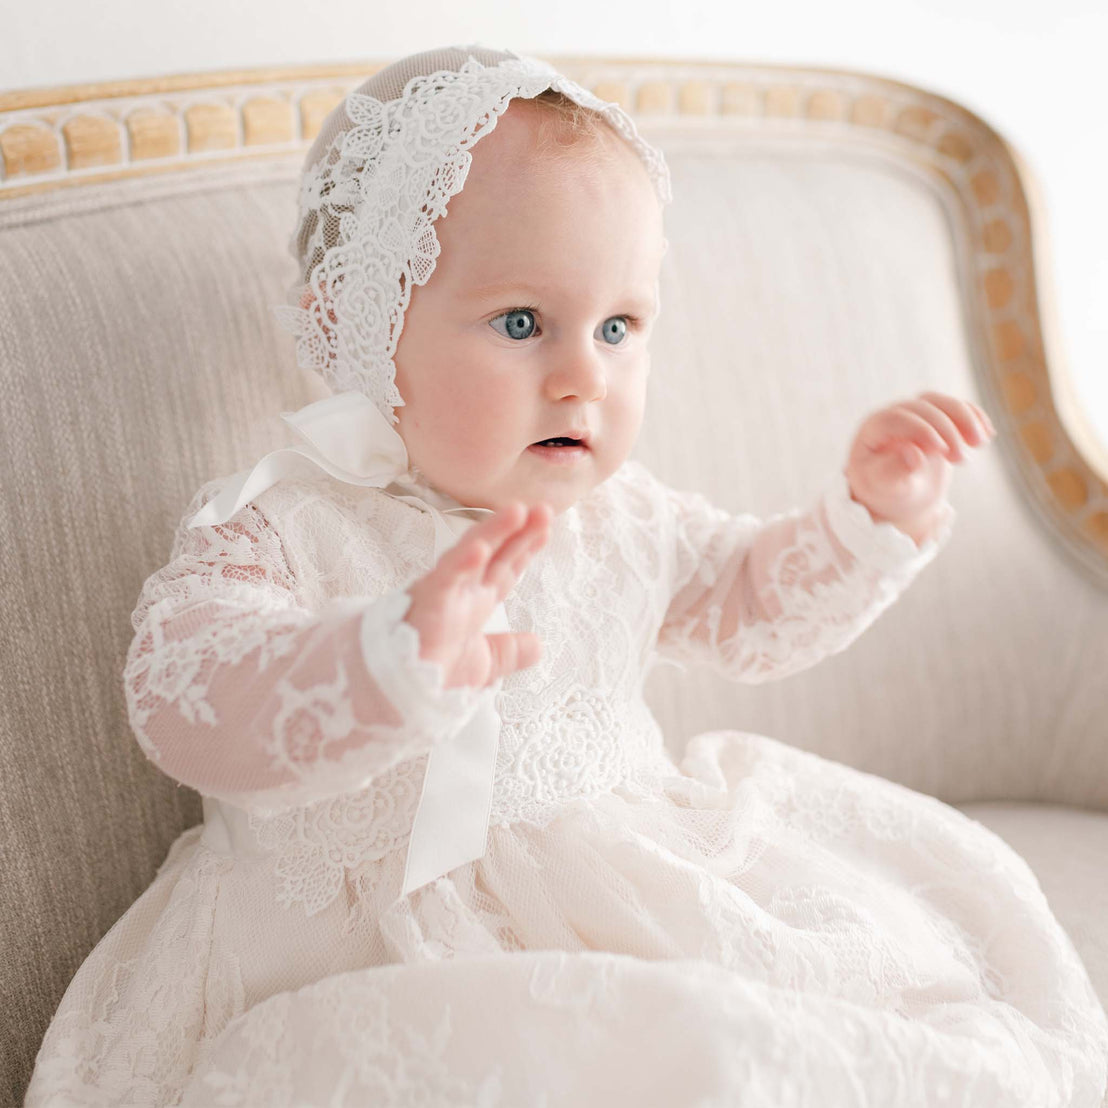 A baby with bright blue eyes, wearing a white Juliette Lace Bonnet and lace dress from Baby Beau & Belle, sits on a beige sofa, looking slightly to the side with a curious expression.